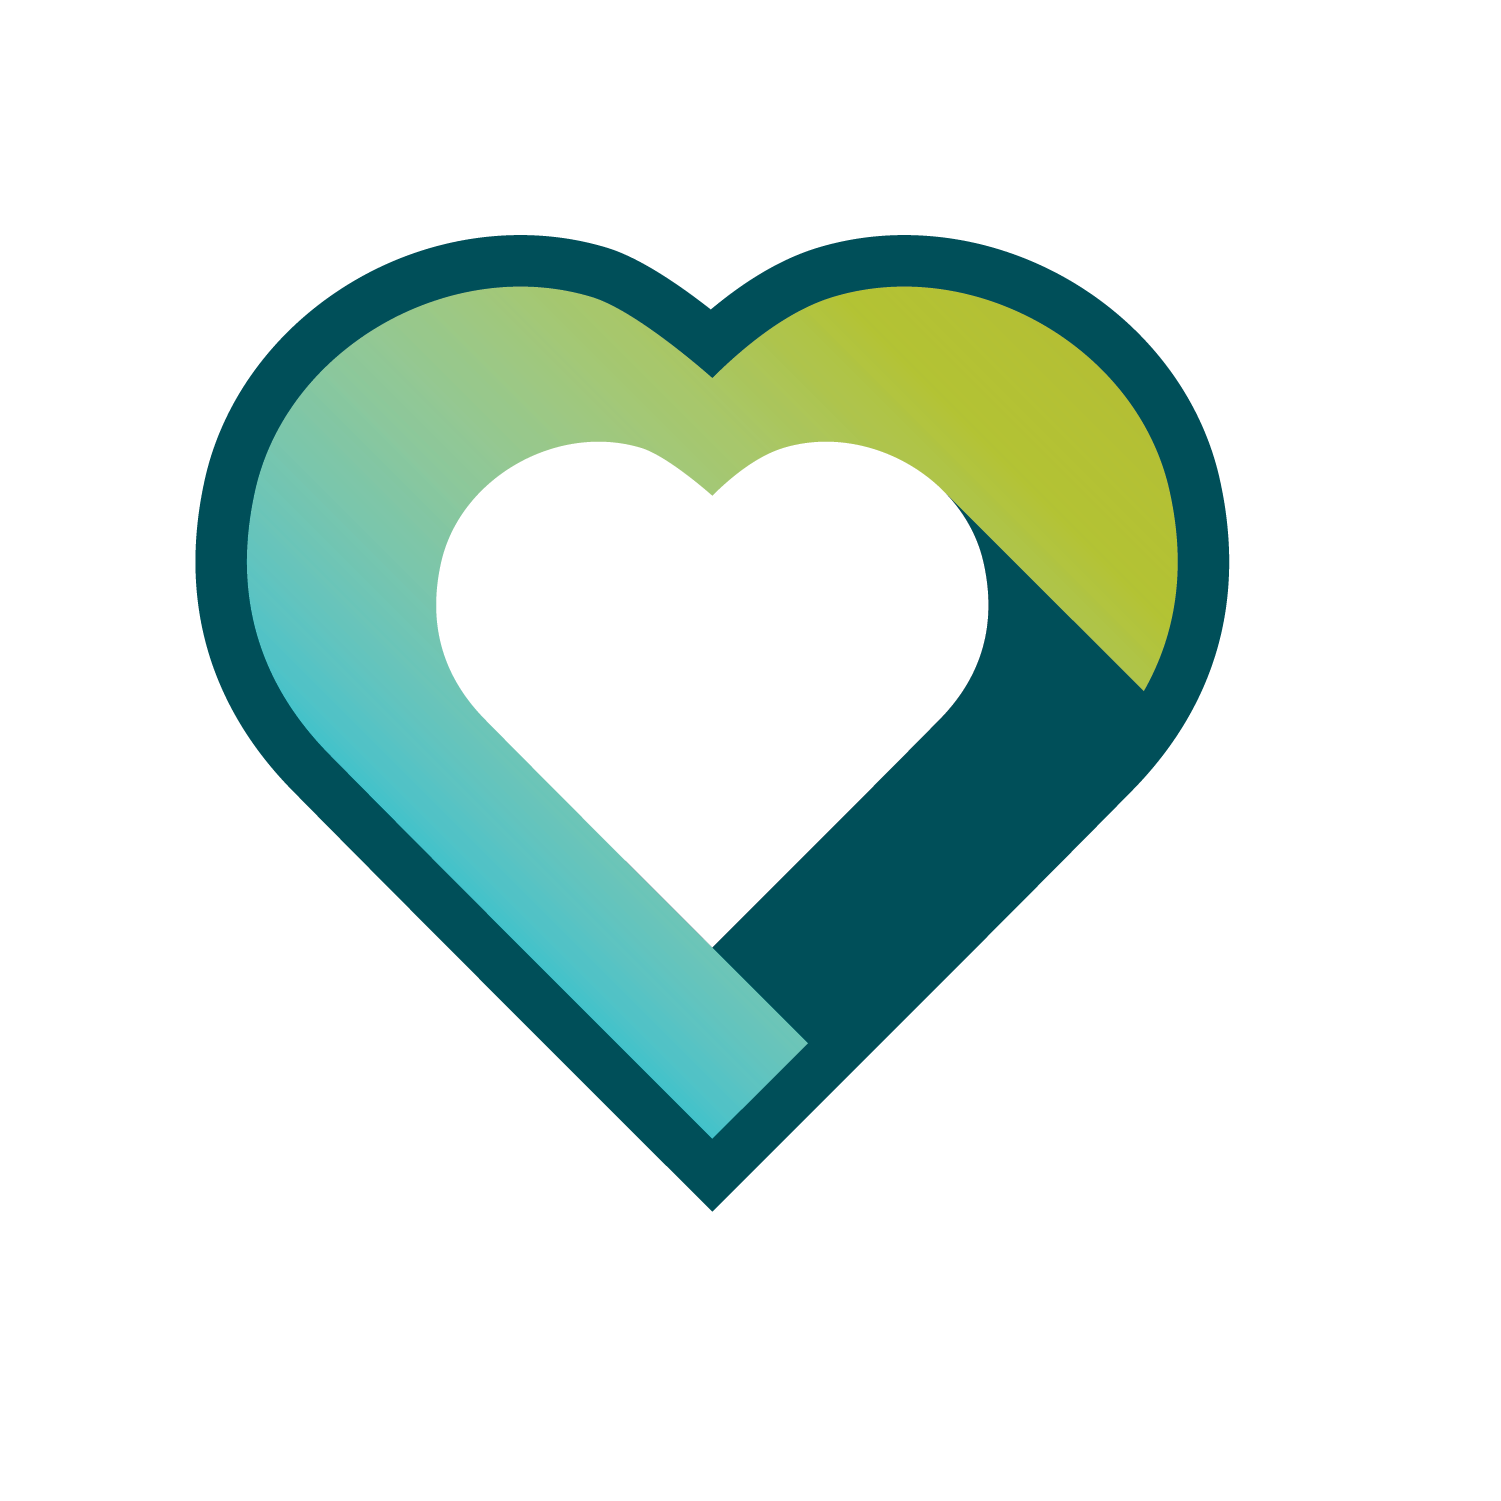 Heart in a heart icon